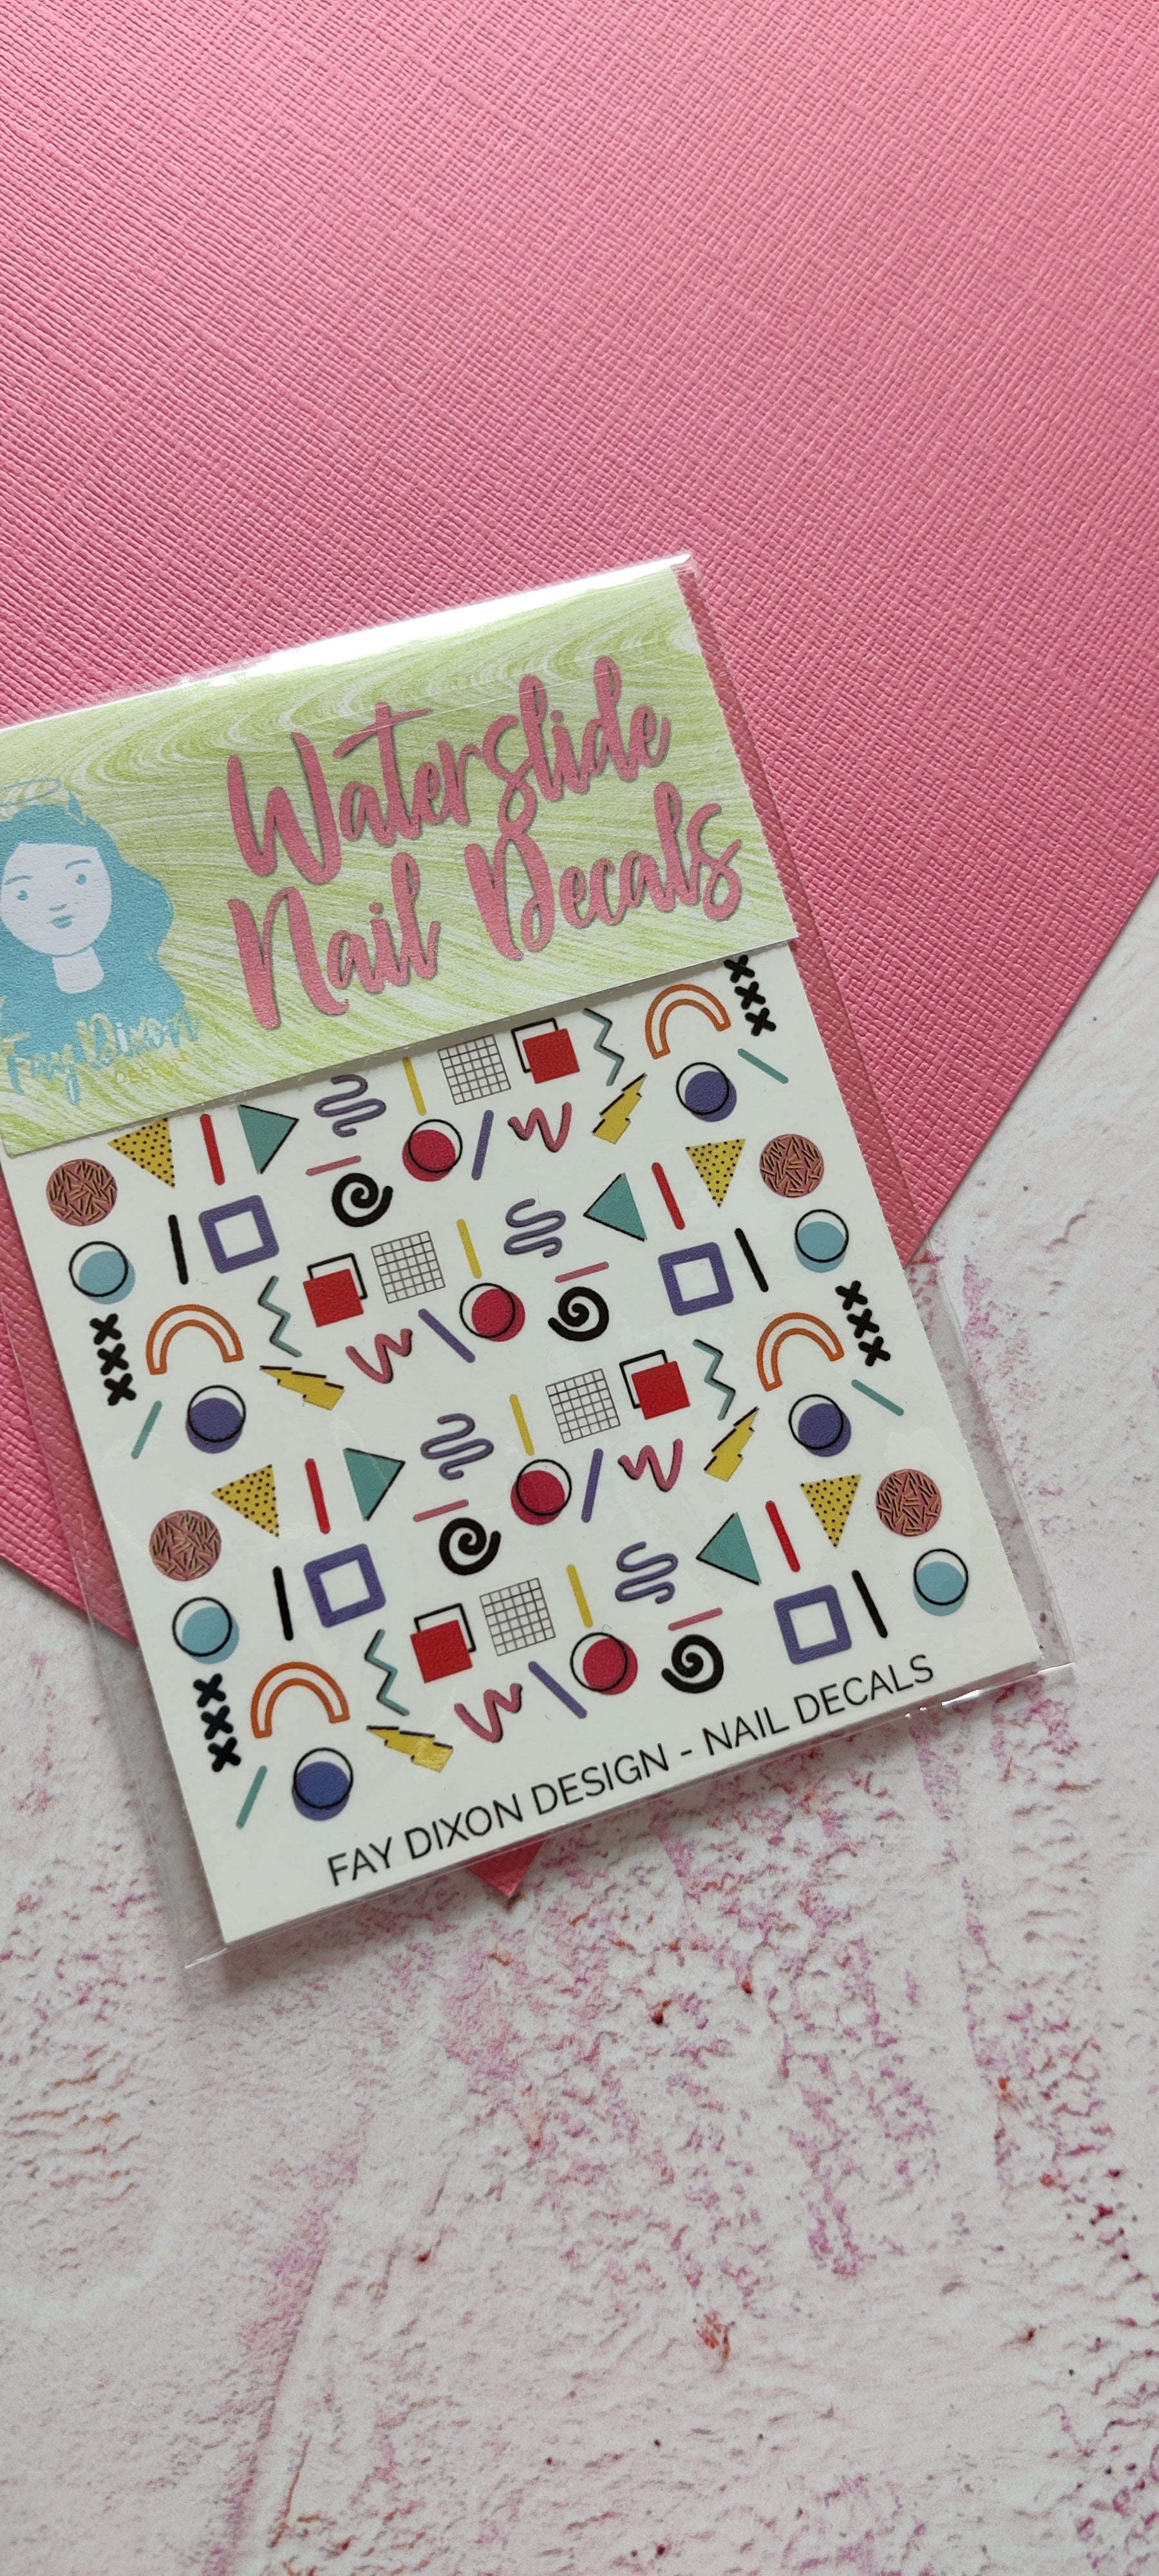 90s Baby Waterslide Nail Decals - Fay Dixon Design